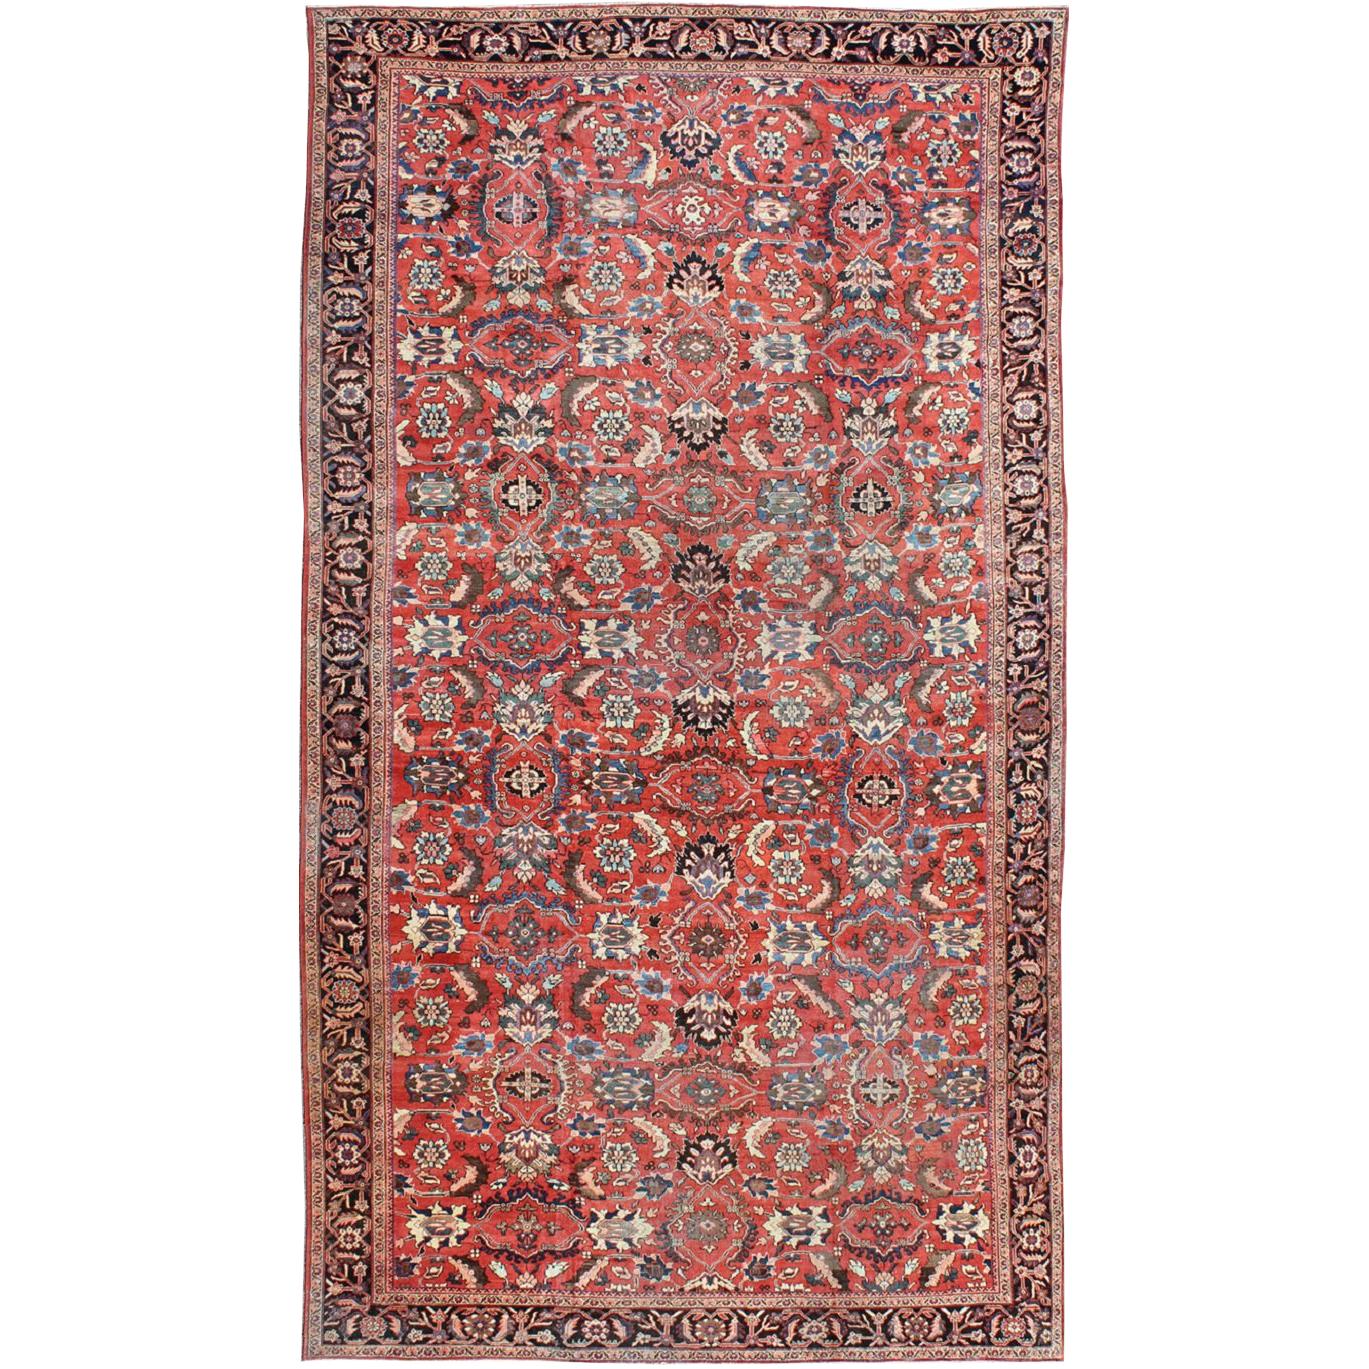 Very Large Persian Sultanabad Mahal Rug in Red, Brown, Green, Cream & Blue 